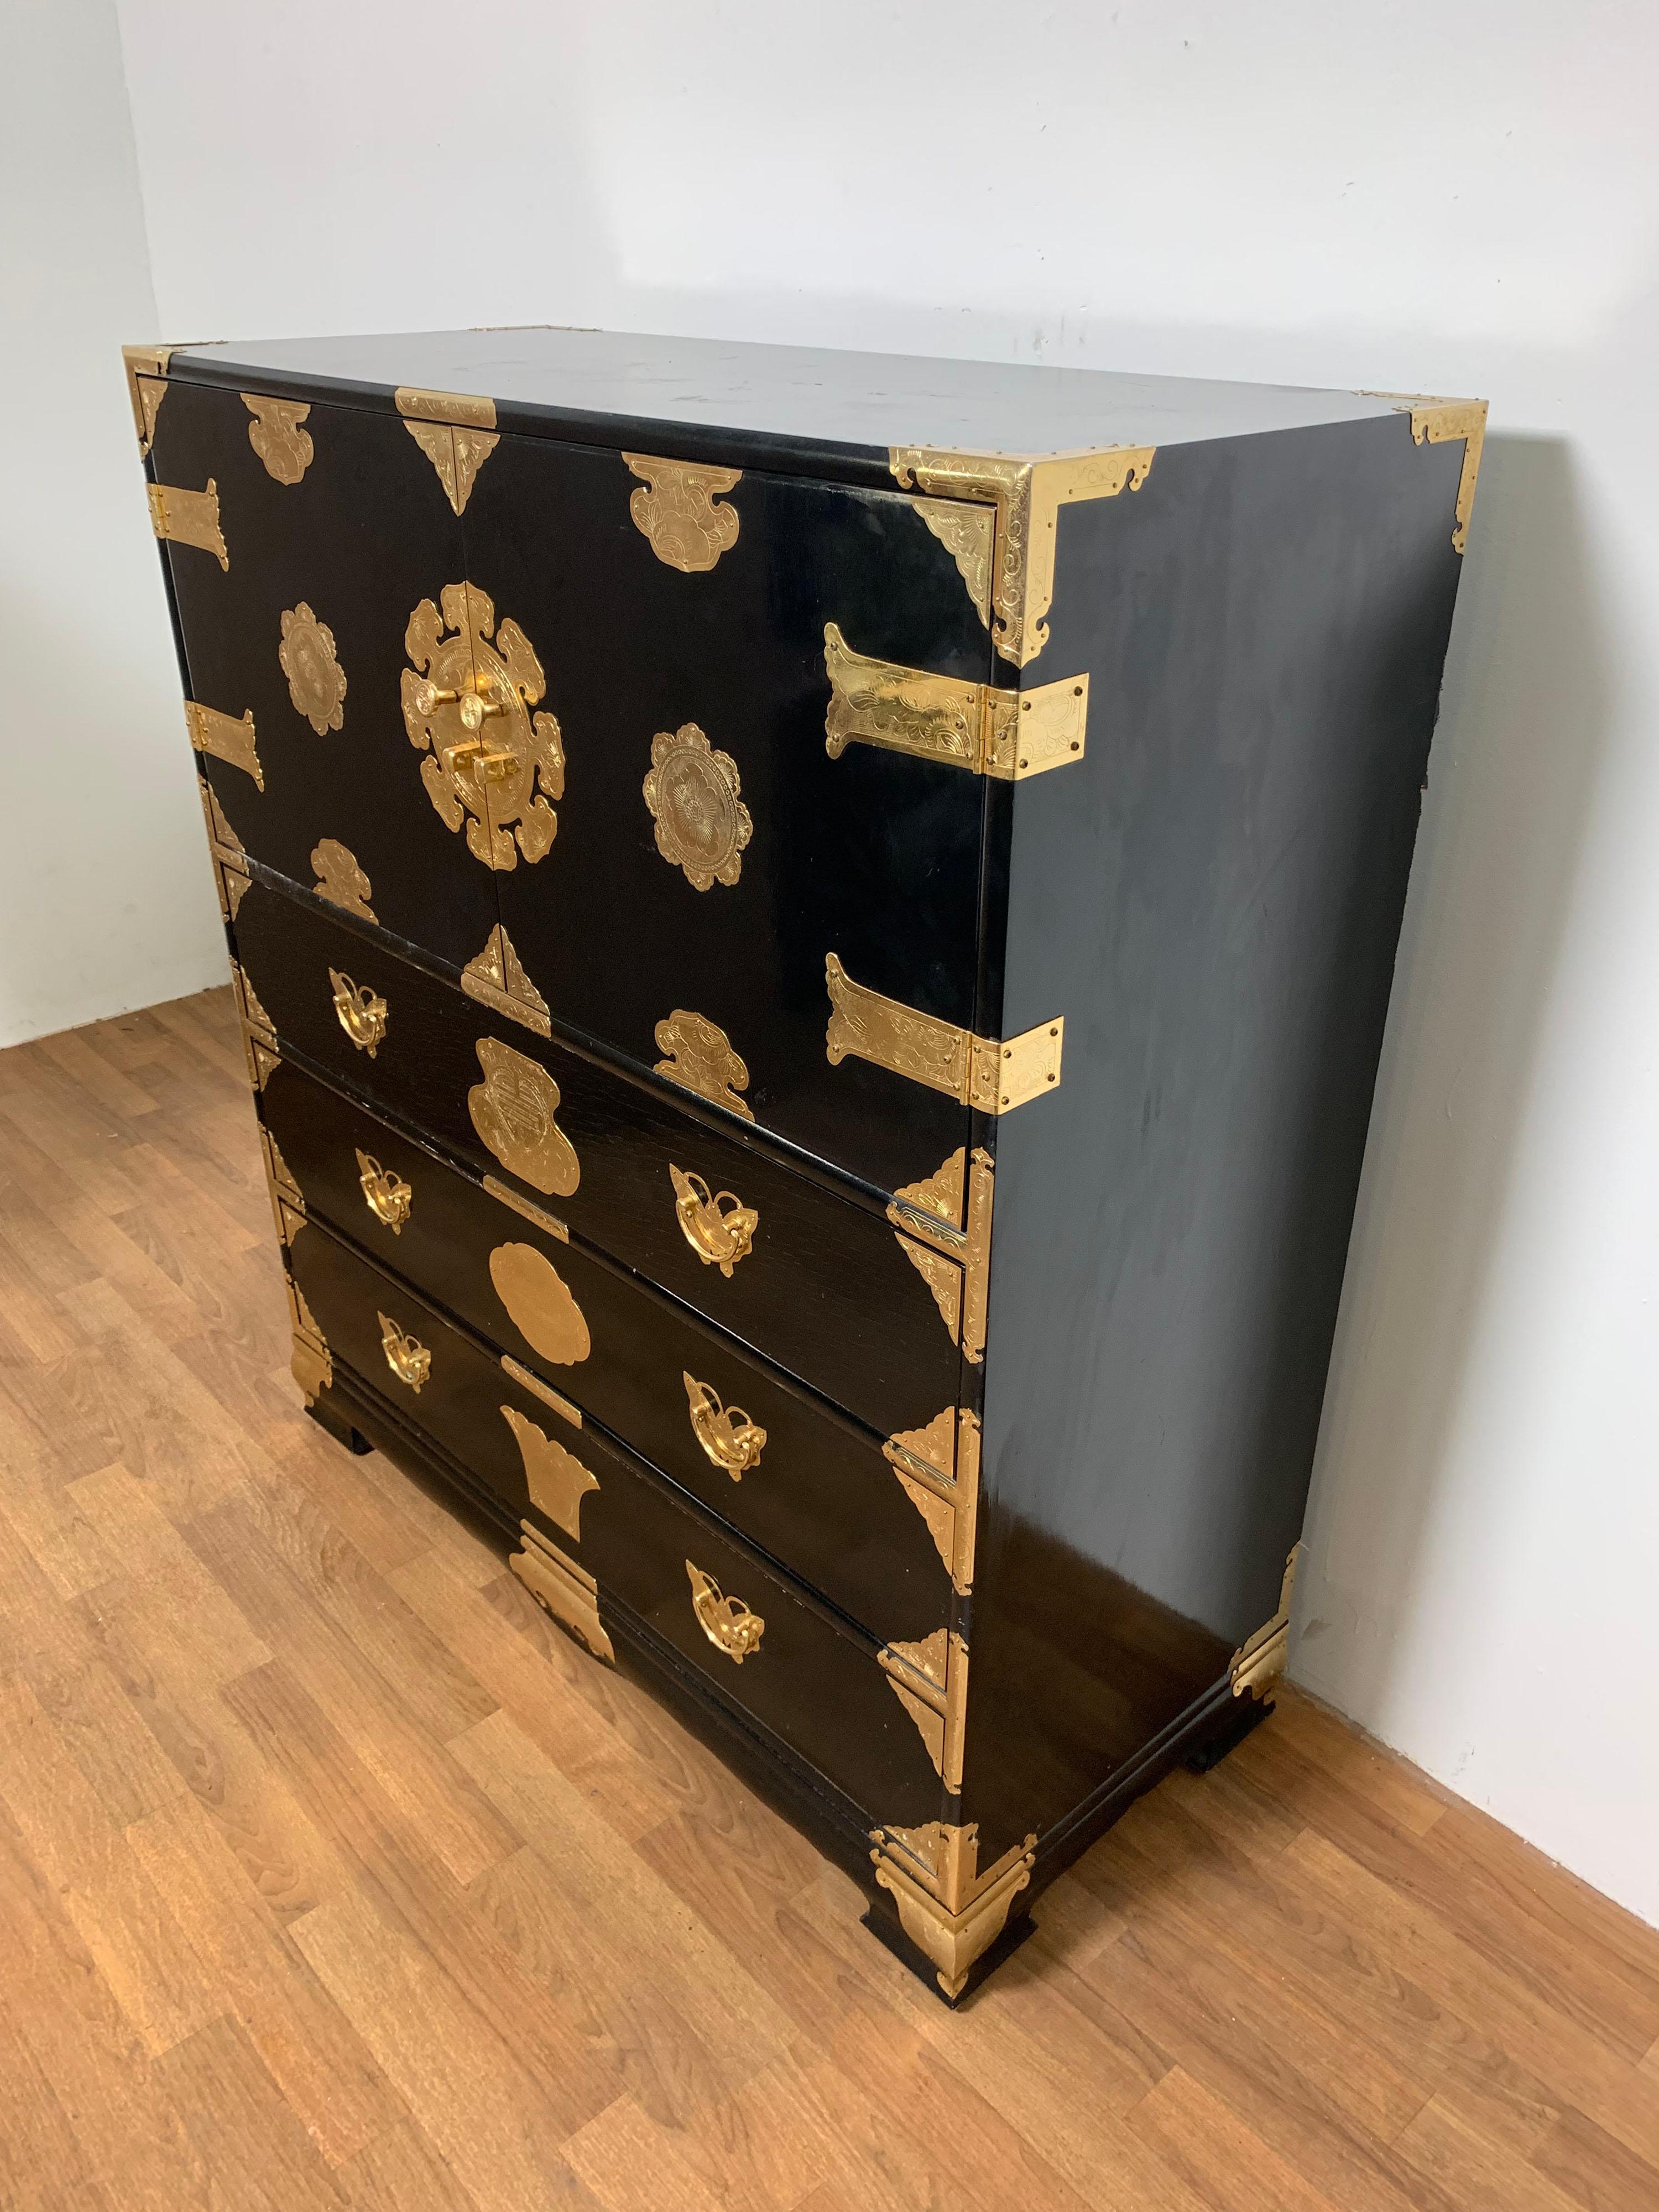 Generously proportioned mid-century chest in black lacquer with brass strapwork, in the manner of a Korean bandaji (blanket chest).